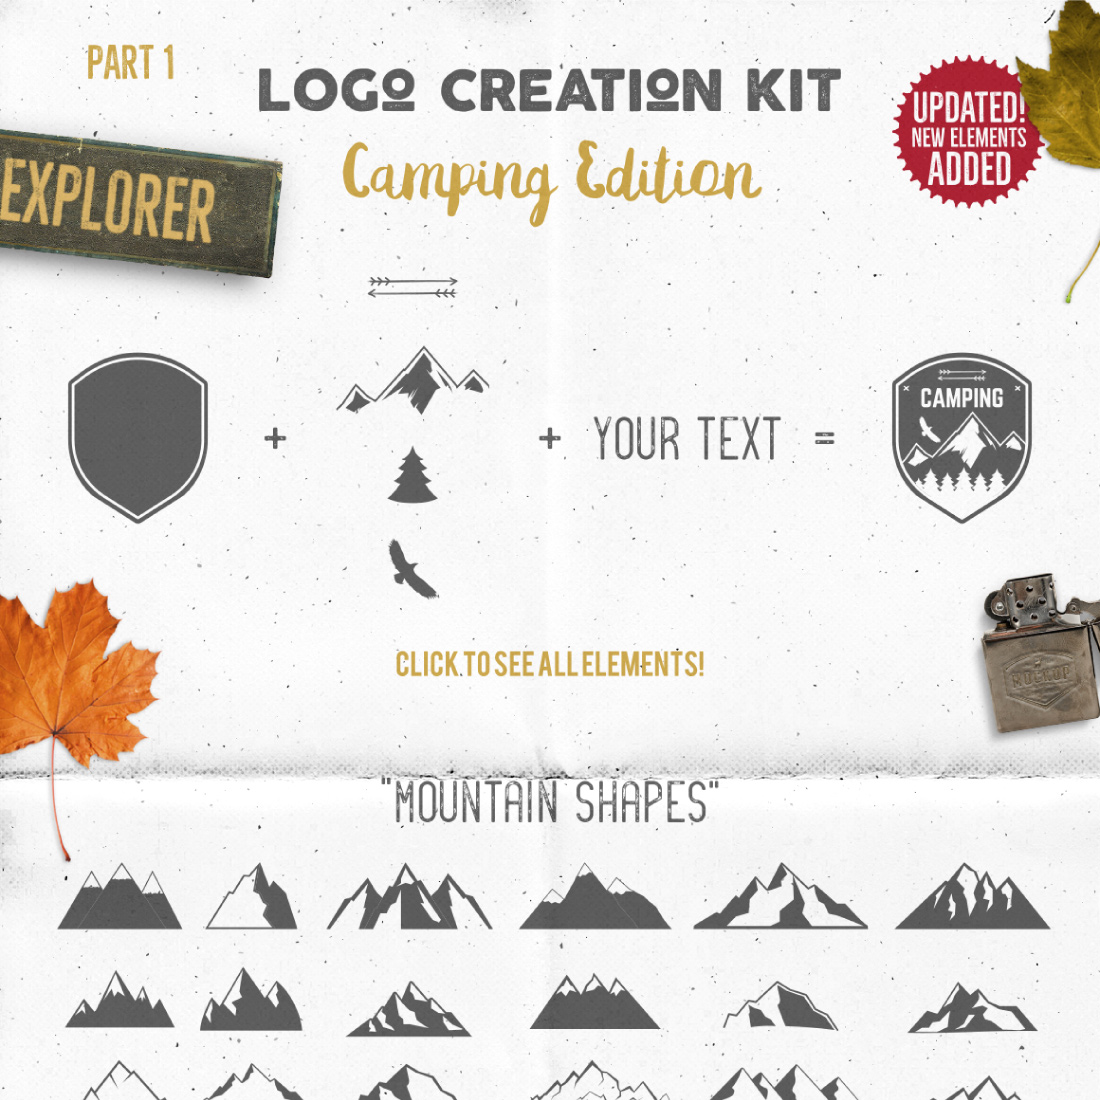 Logo Creation Kit - Camp Edition preview image.